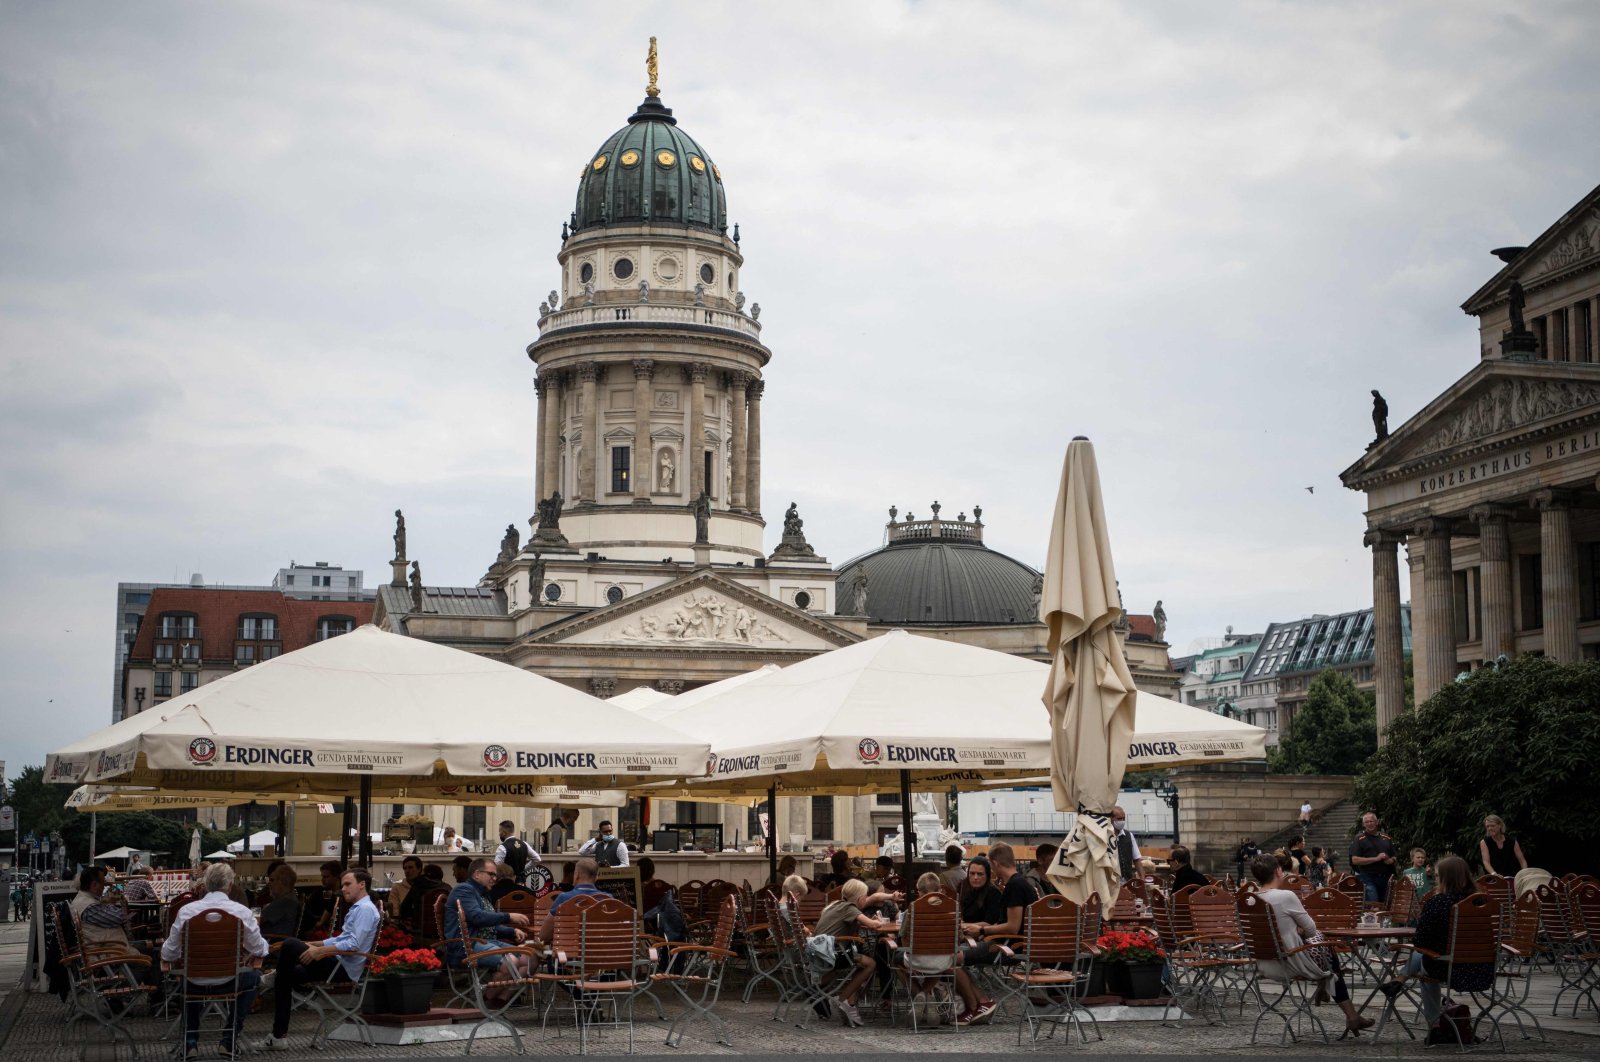 People sit outside in a restaurant at the Gendarmenmarkt in front of the New Church (Deutscher Dom) and the Konzerthaus concert hall in Berlin, Germany, July 22, 2021. (AFP Photo)